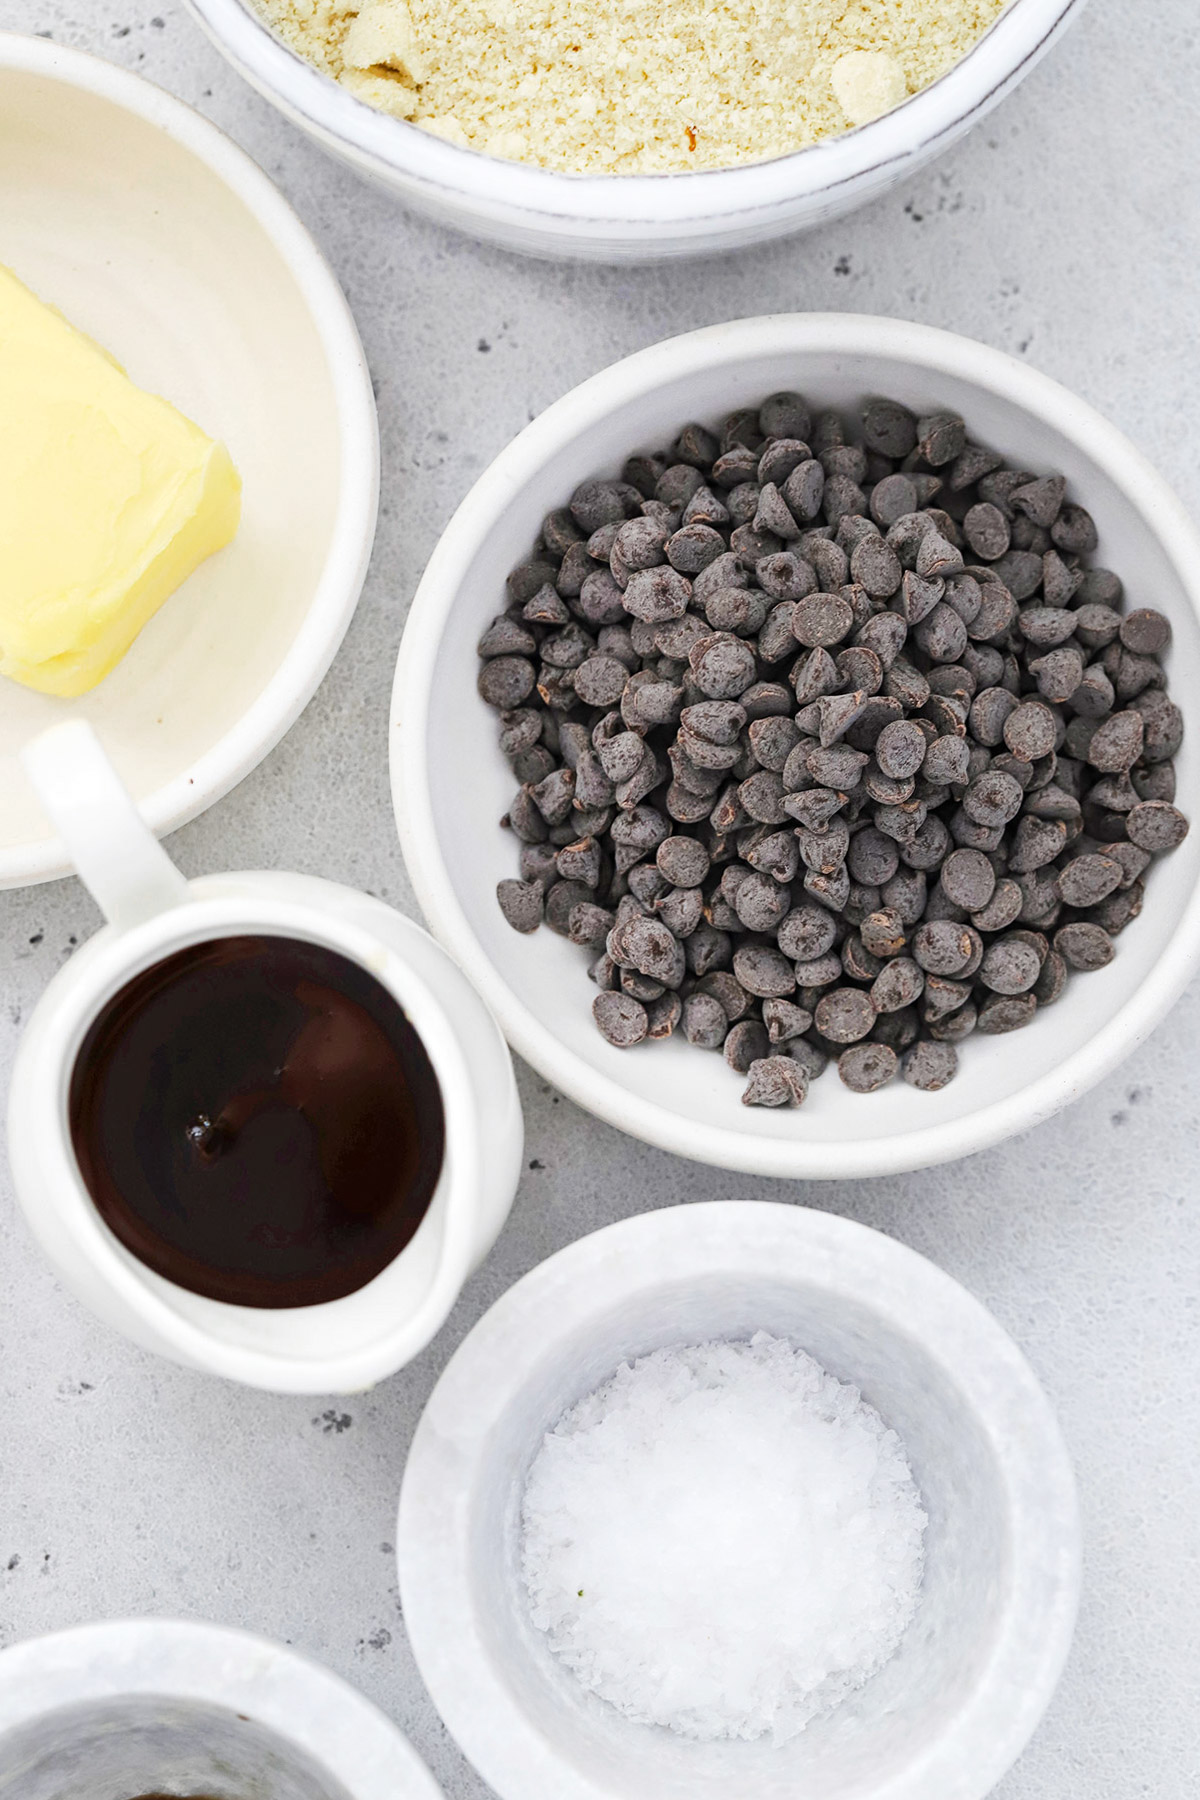 Overhead view of ingredients for healthy edible cookie dough